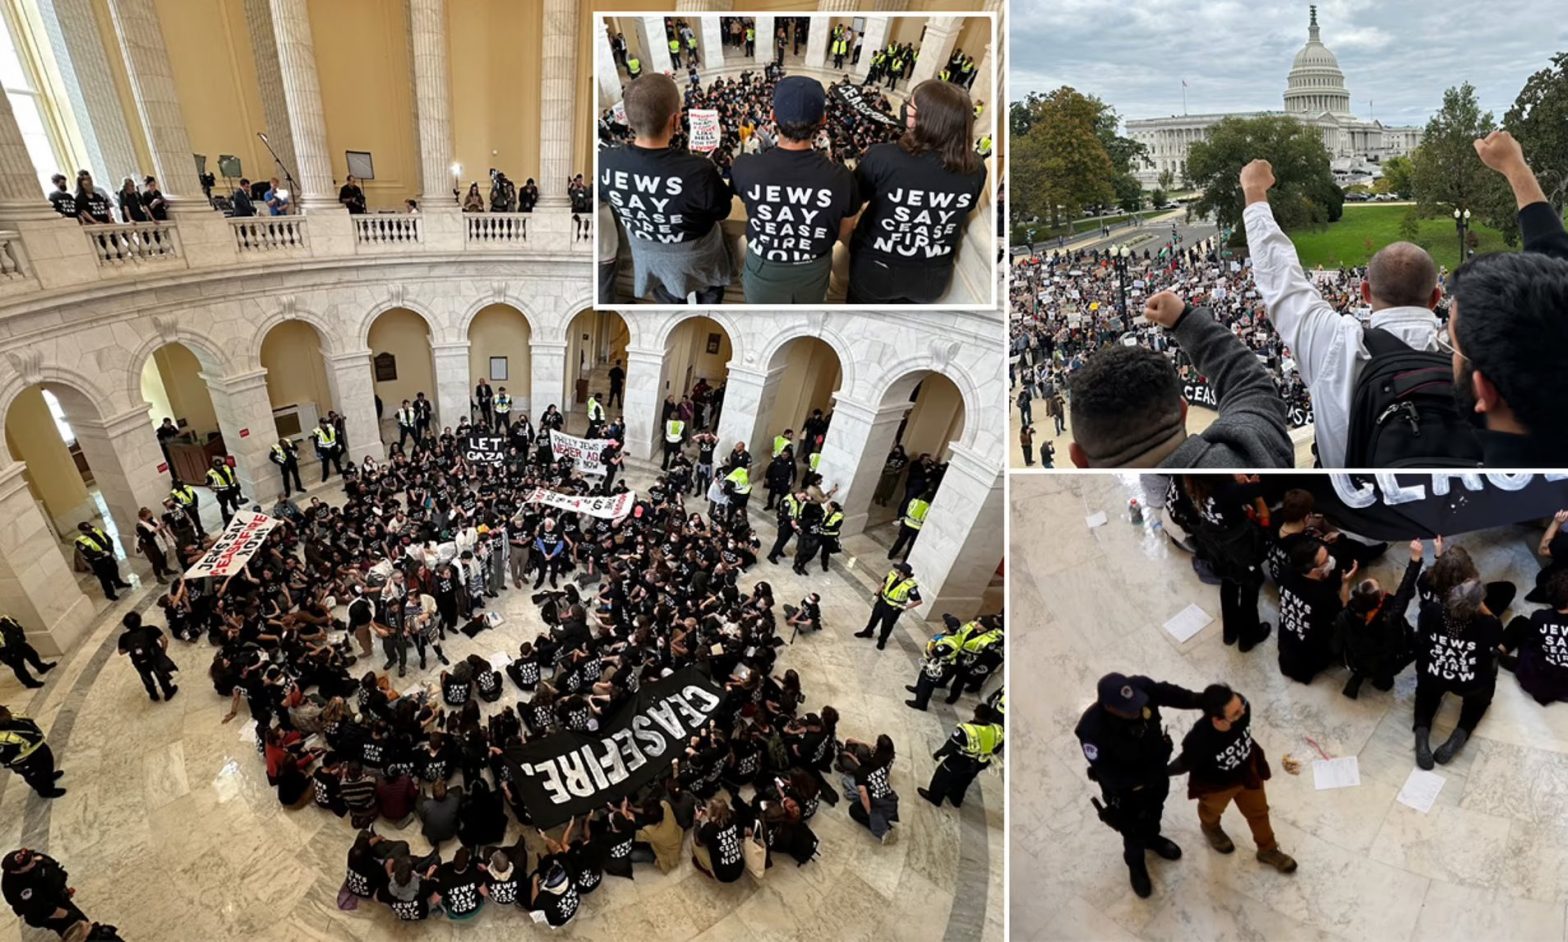 ‘Not in our Name’: Jewish pro-Palestinians flood US Capitol Rotunda demanding ceasefire, several arrested | Watch video